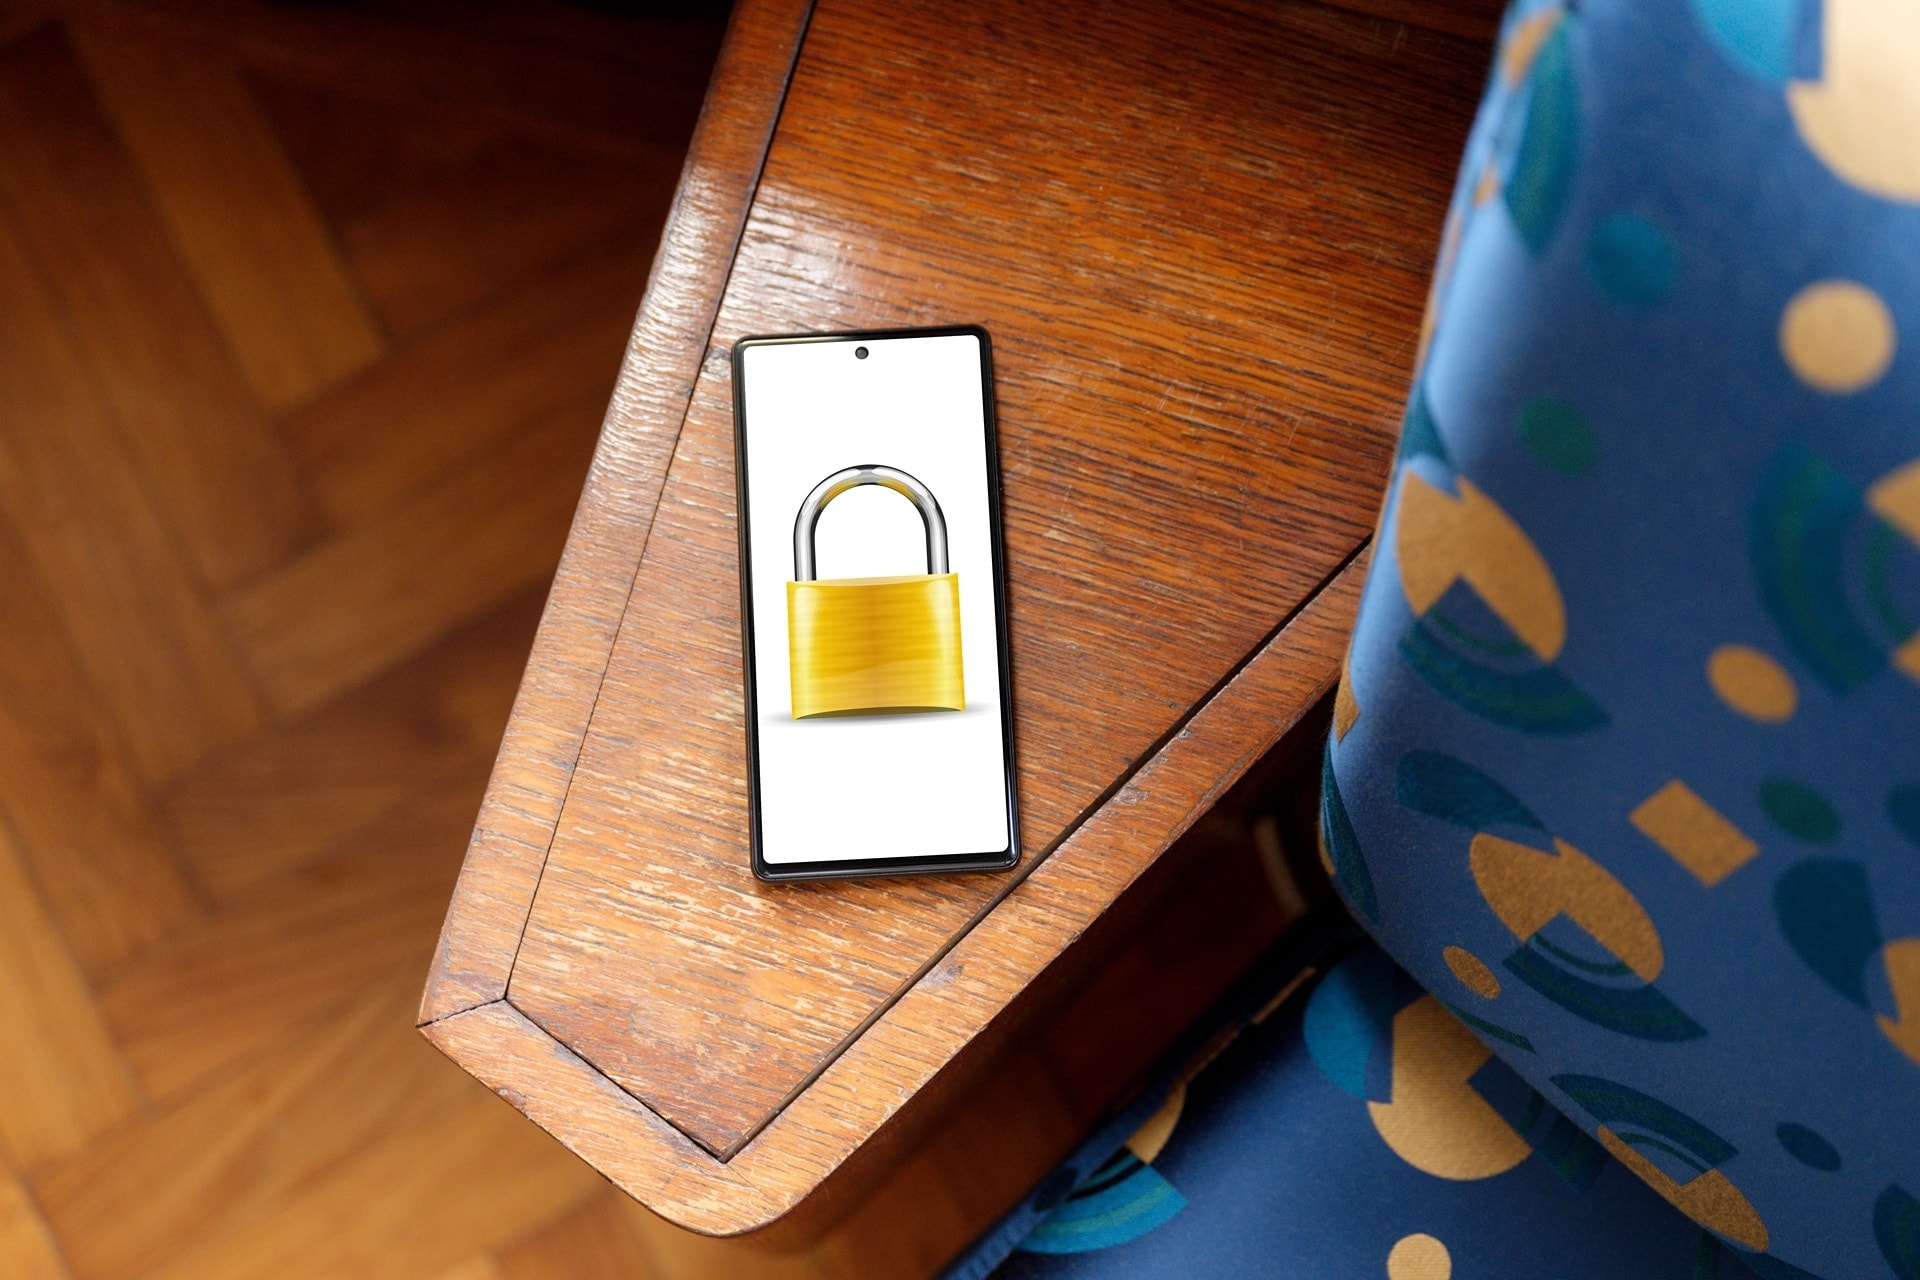 Padlock on an Android phone on a table.